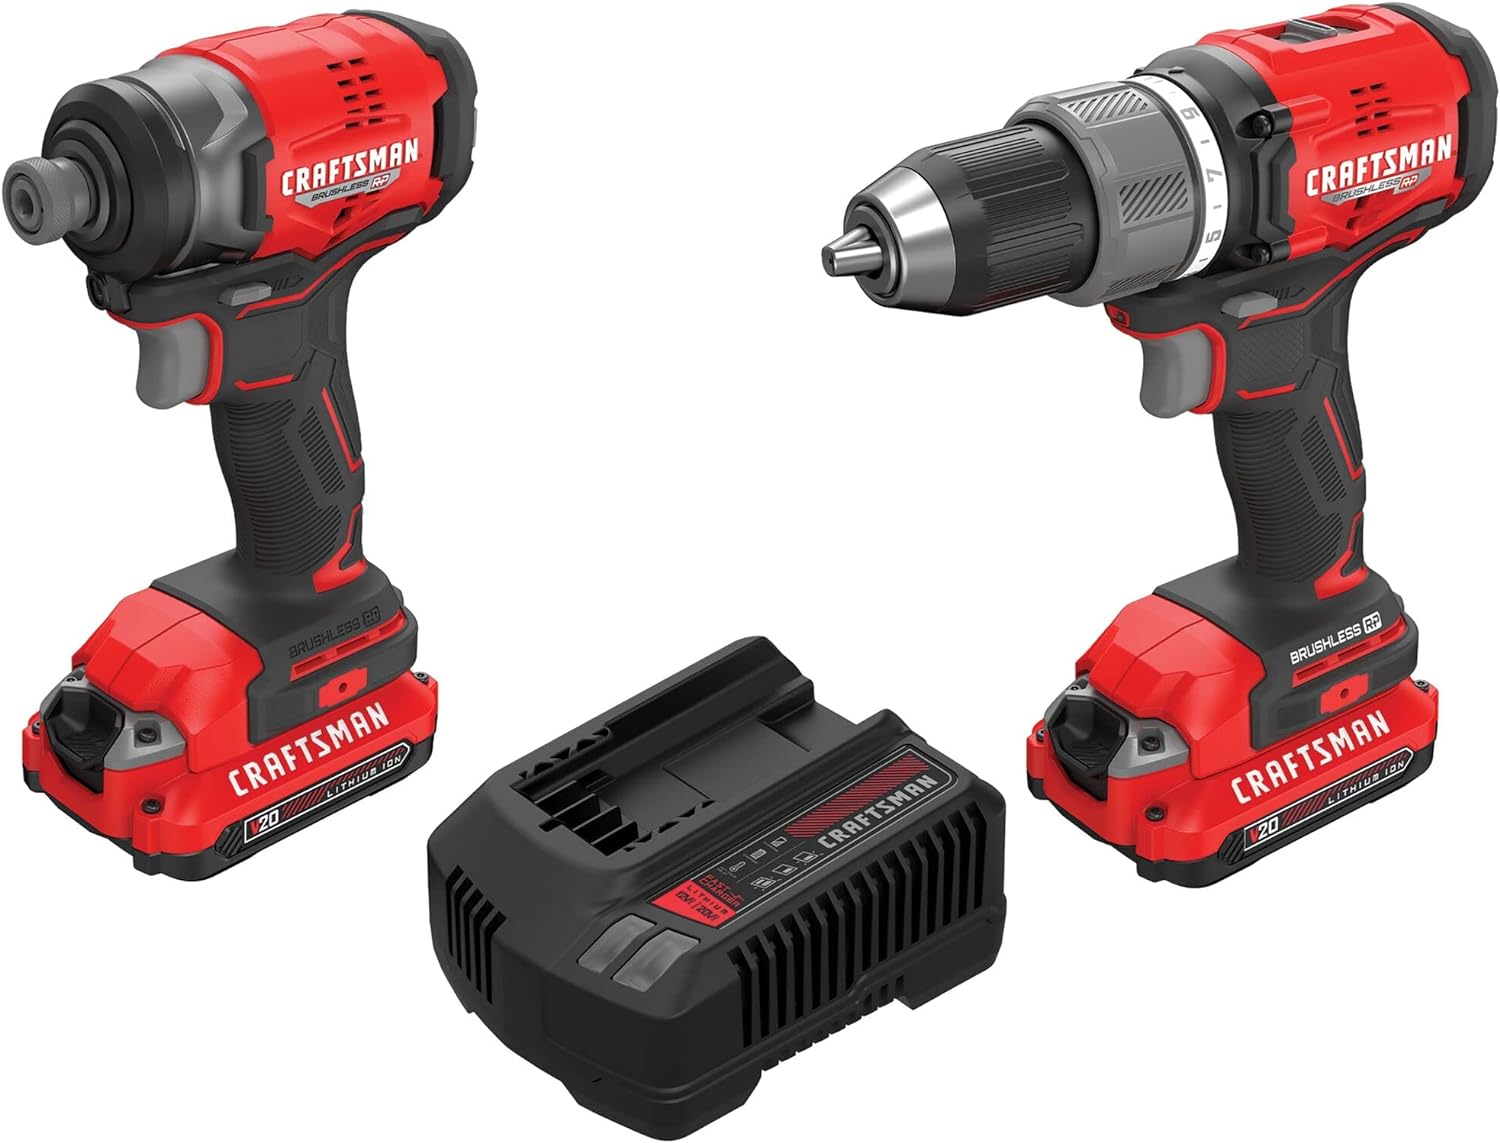 Craftsman V20 Rp Cordless Drill And Impact Driver Review